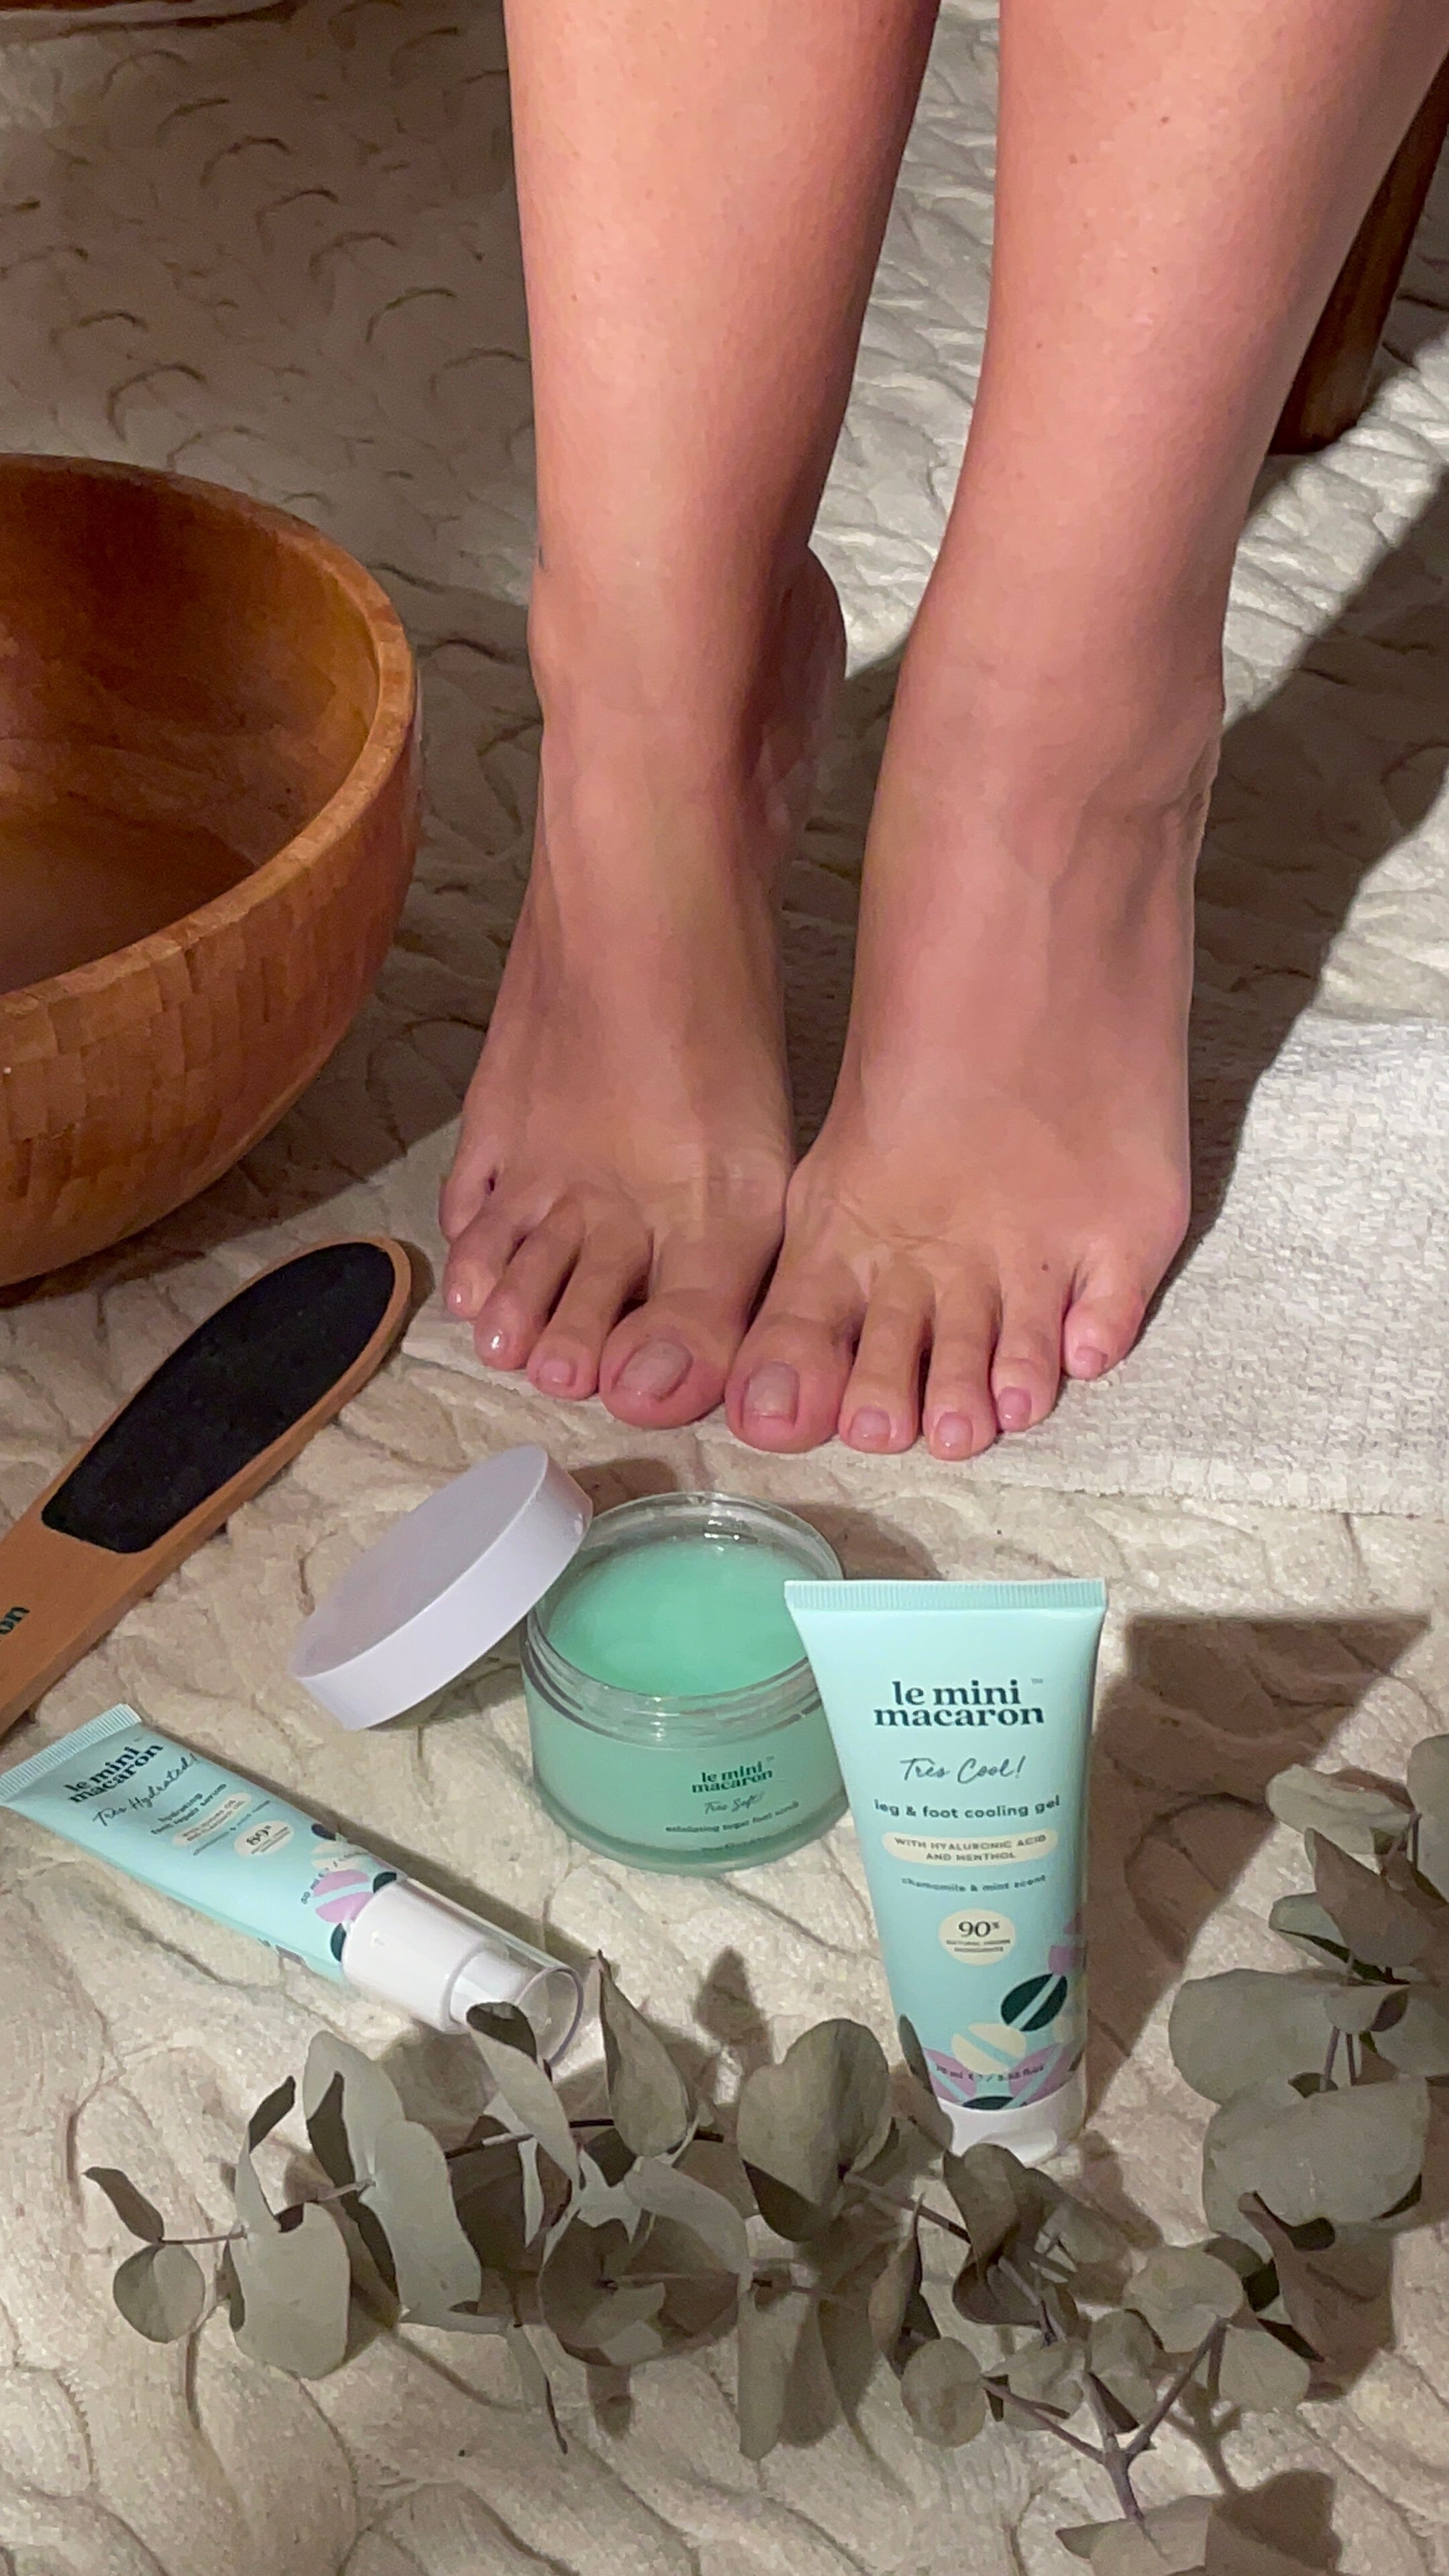 Can You Apply Gel Polish To Your Feet?